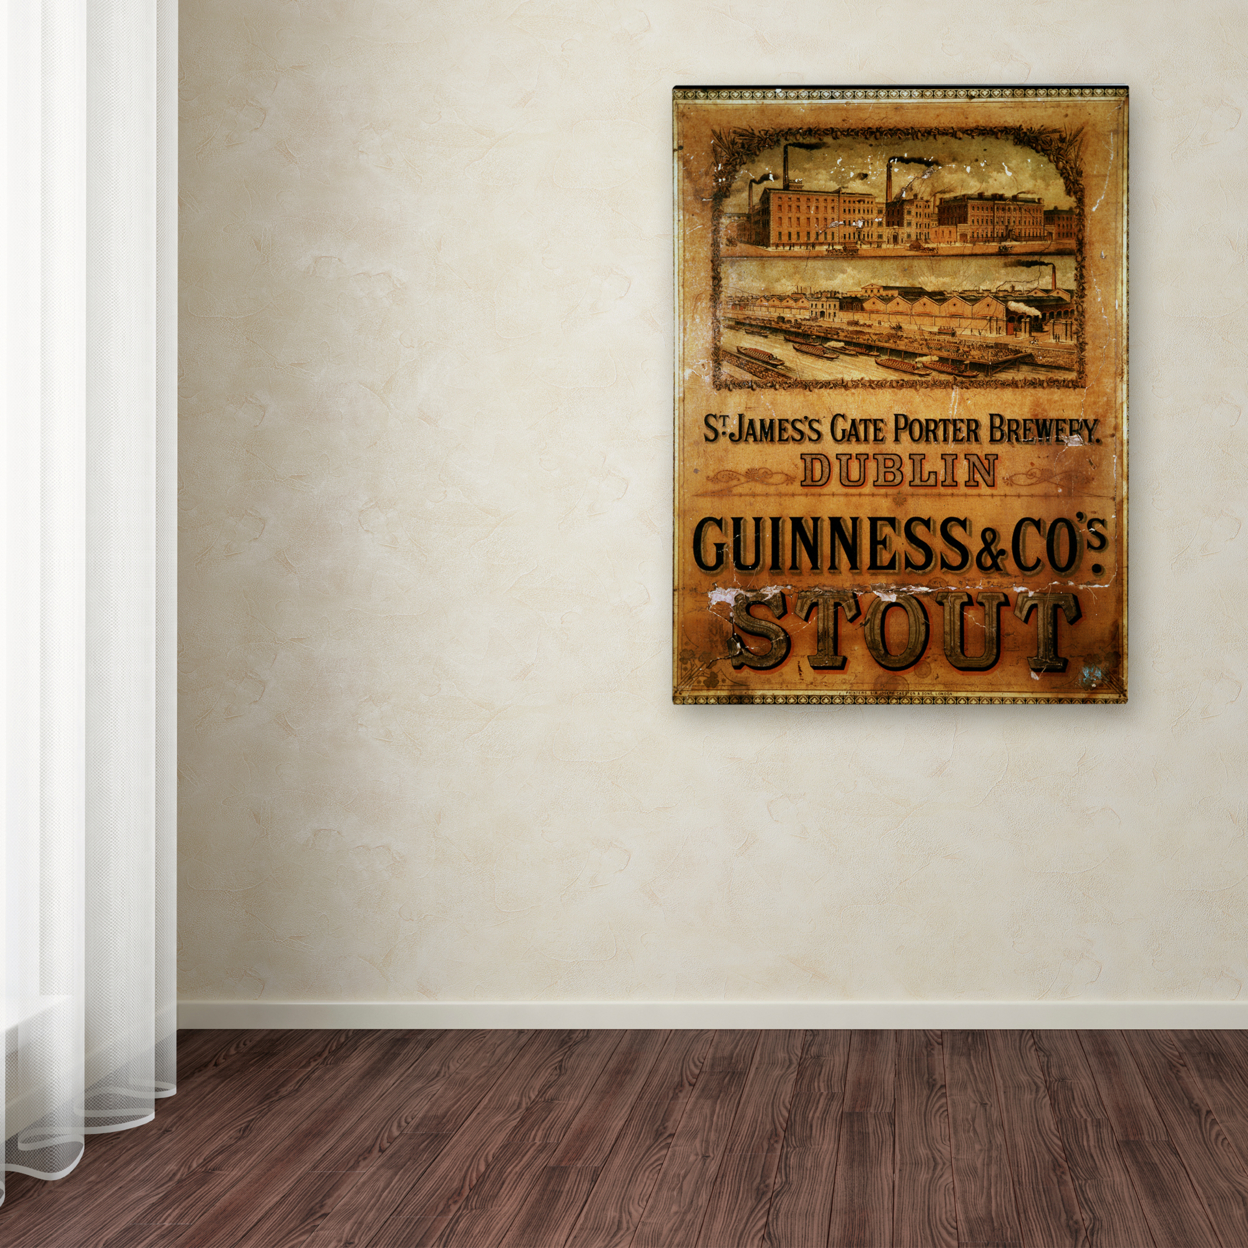 Guinness Brewery 'St. James' Gate Porter Brewery' Canvas Wall Art 35 X 47 Inches